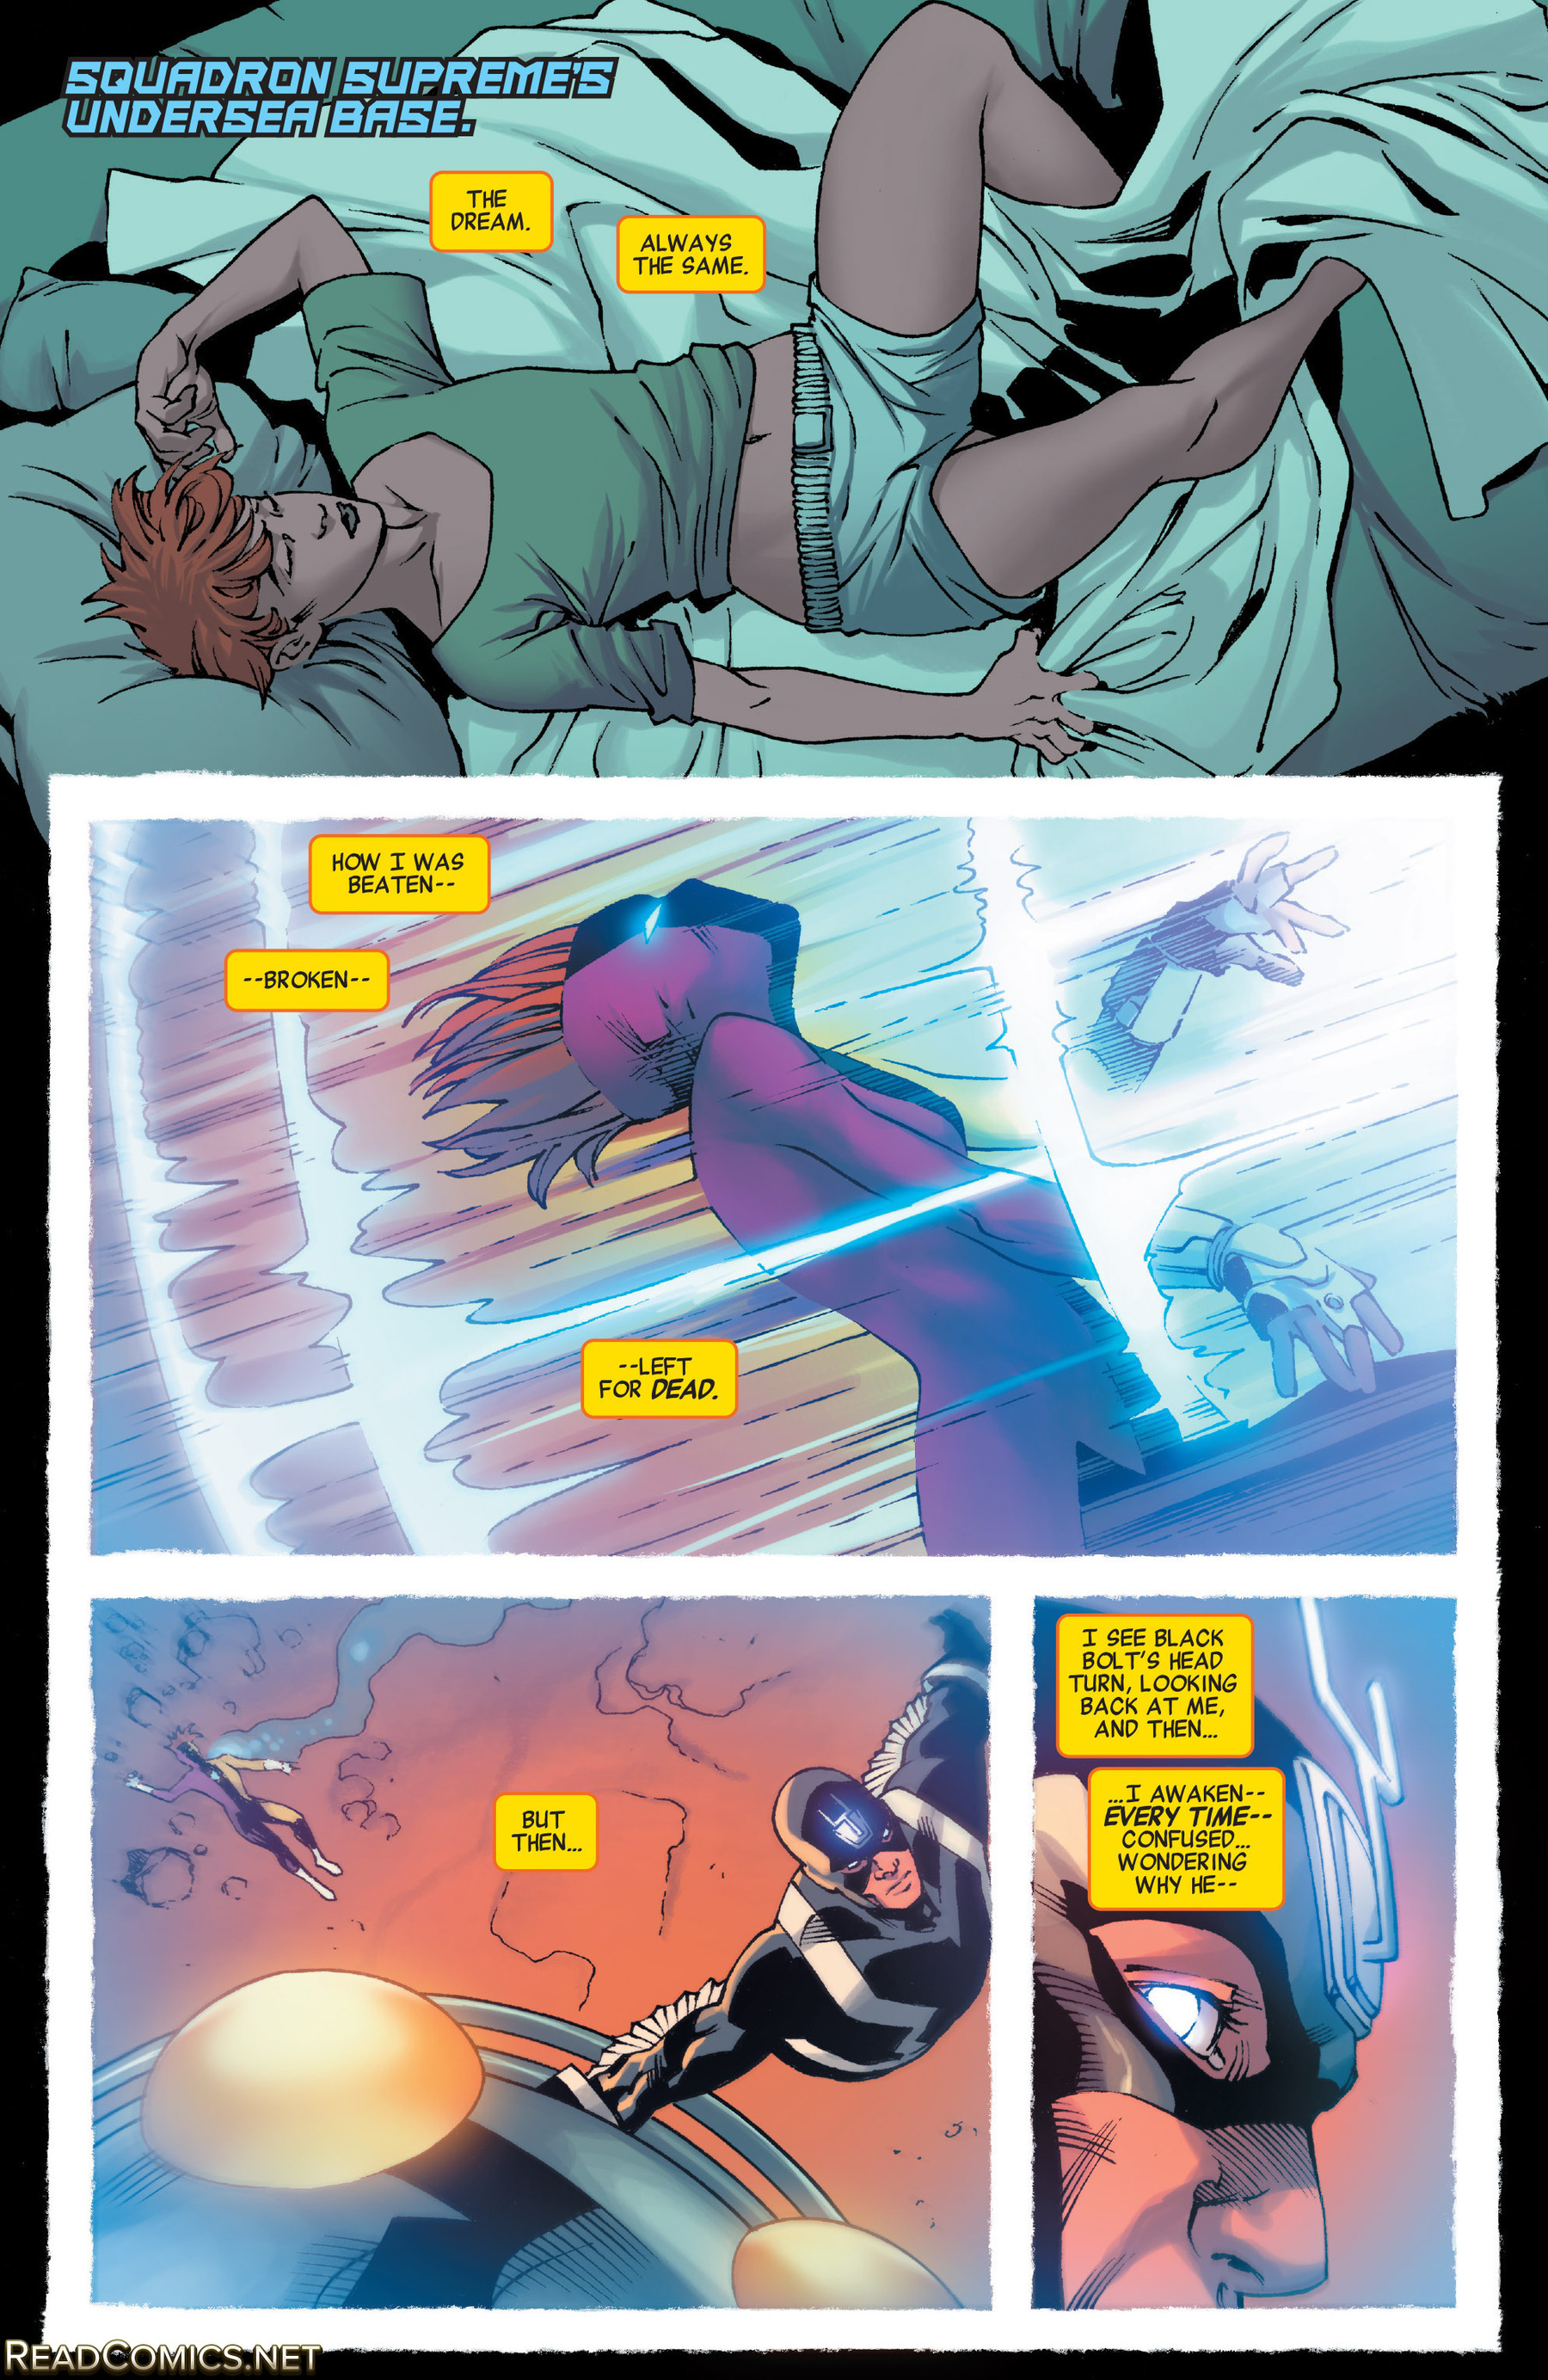 Squadron Supreme (2015-): Chapter 6 - Page 3